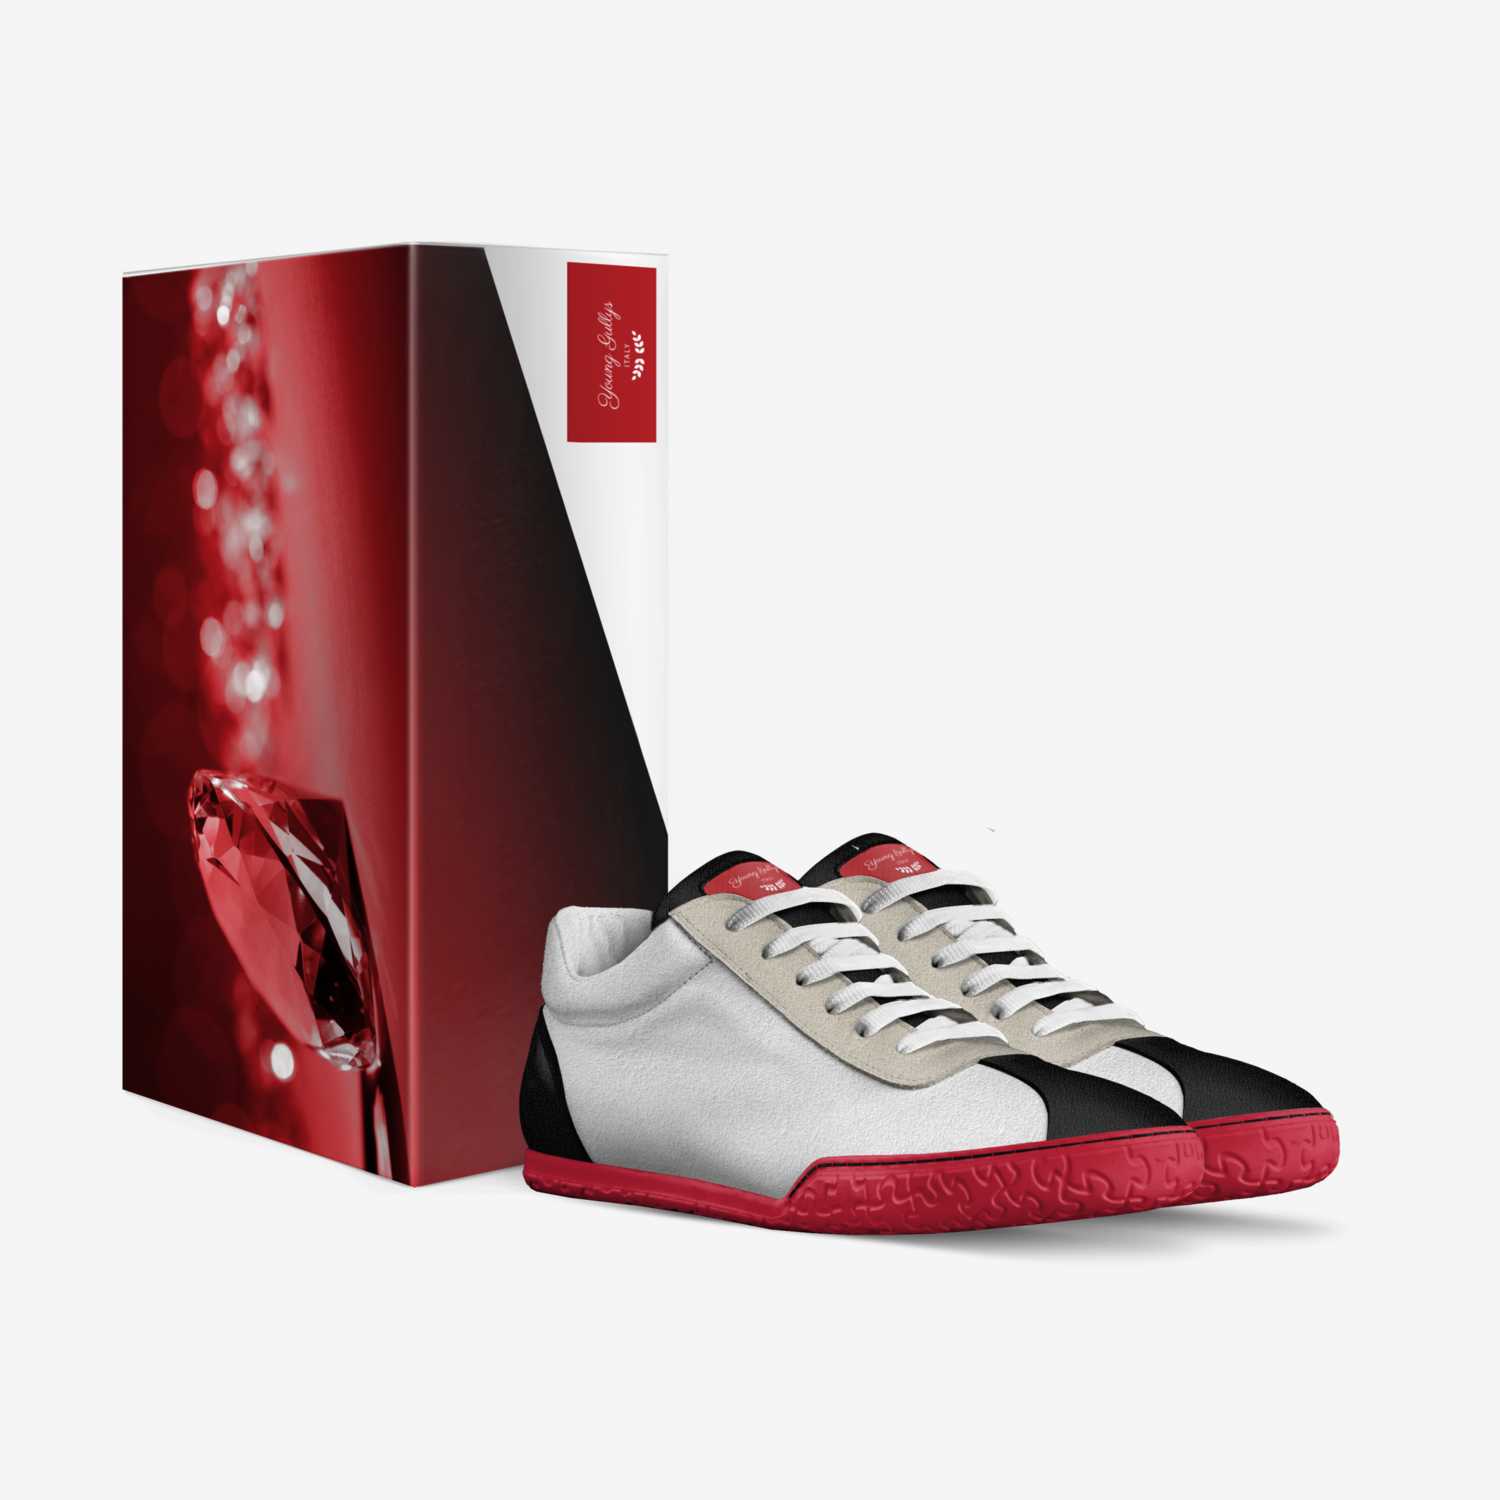 Young Gullys custom made in Italy shoes by Christopher Williams | Box view